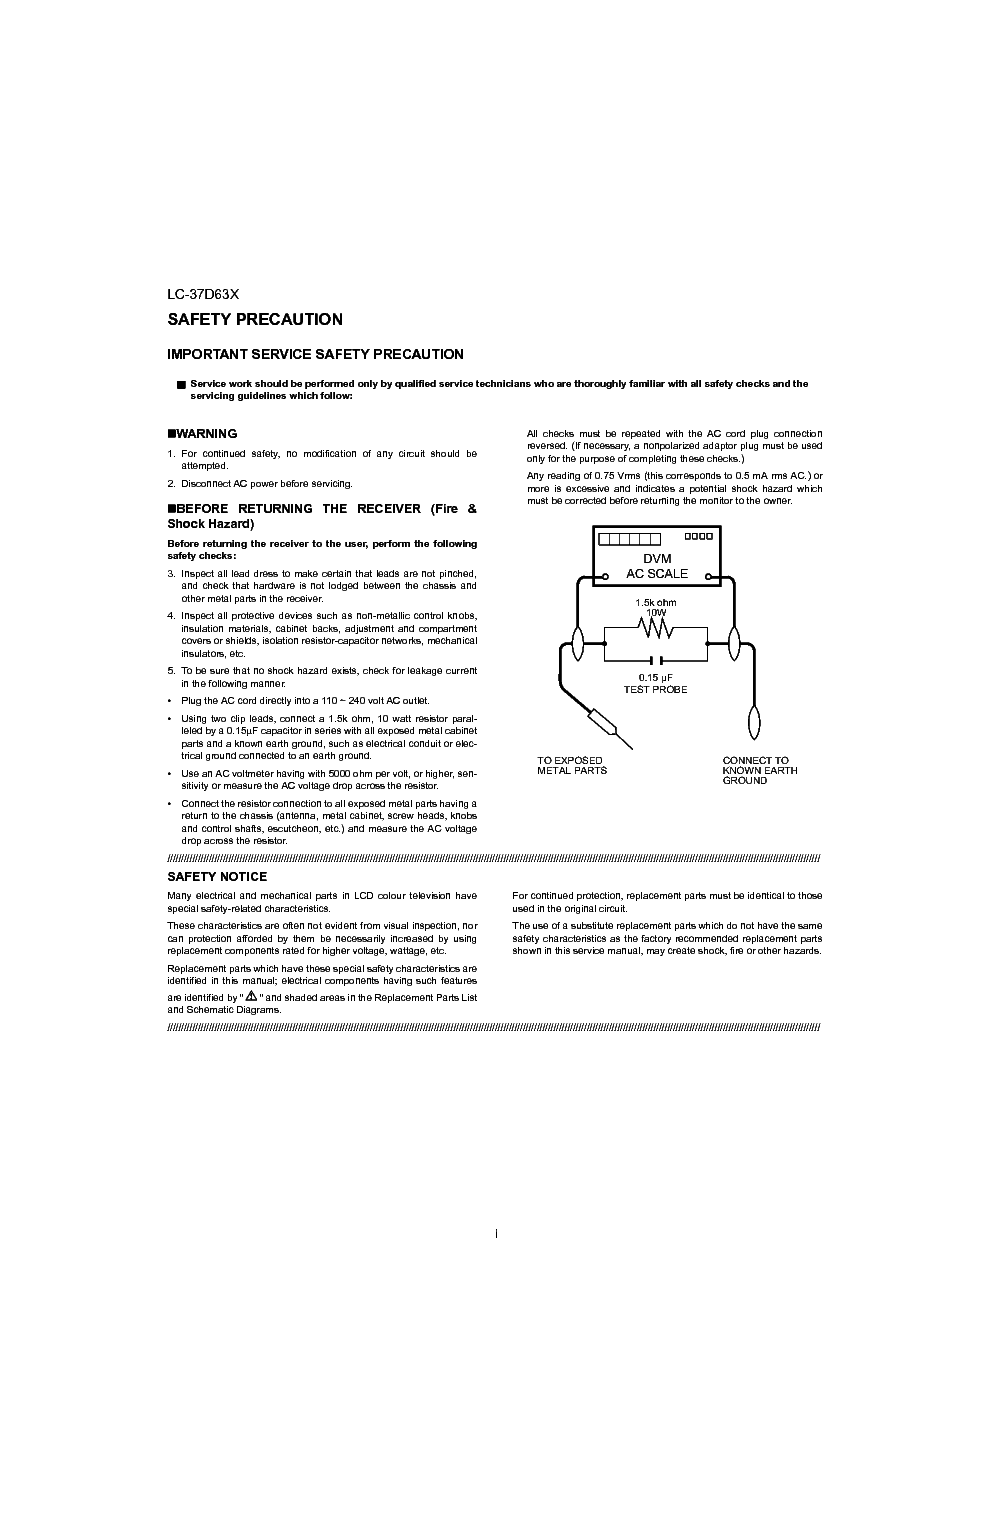 SHARP LC-37D63X service manual (2nd page)